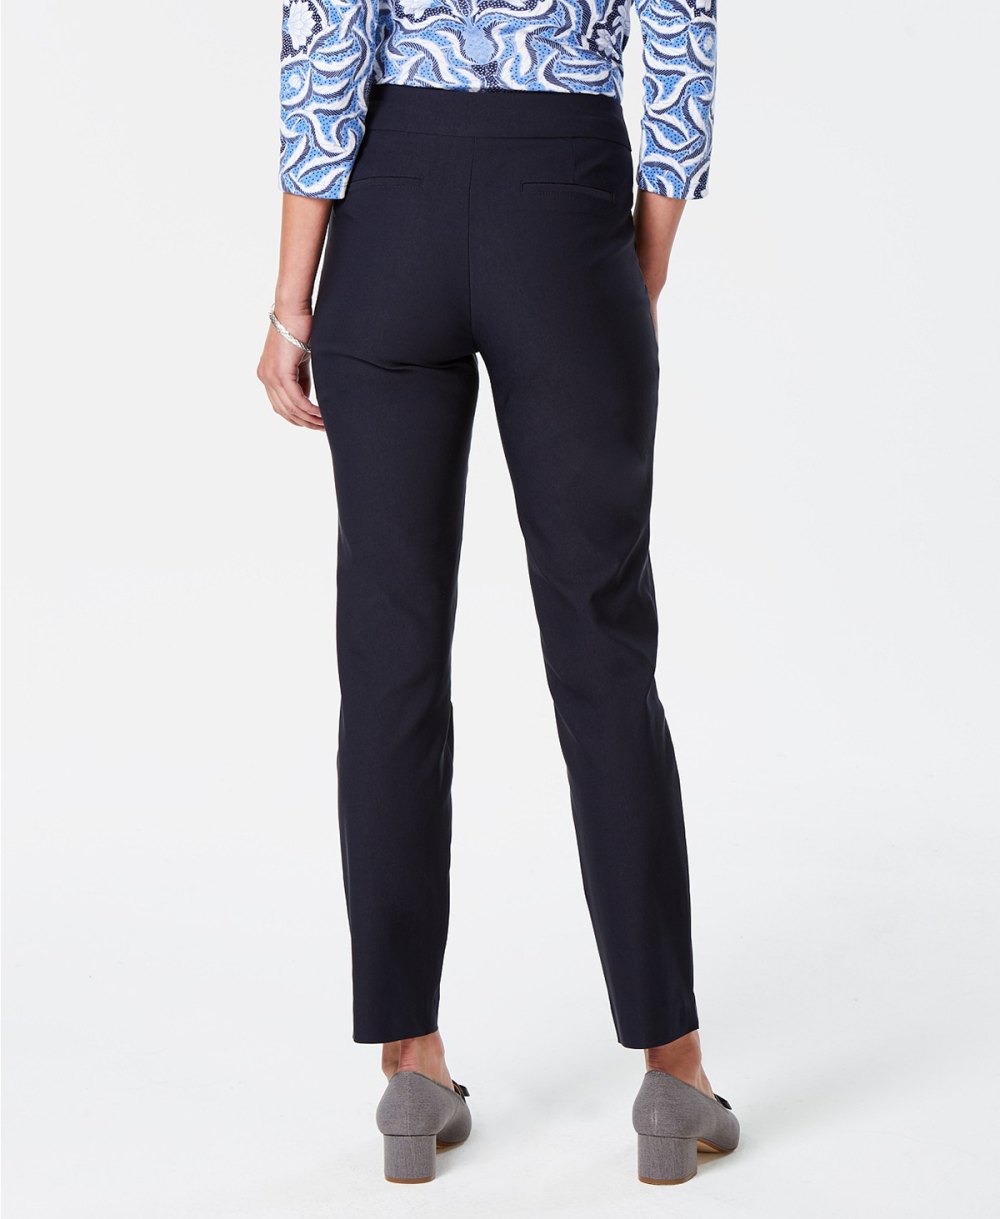 These Top-Rated Pants Are Wildly Flattering — and on Sale! | Us Weekly